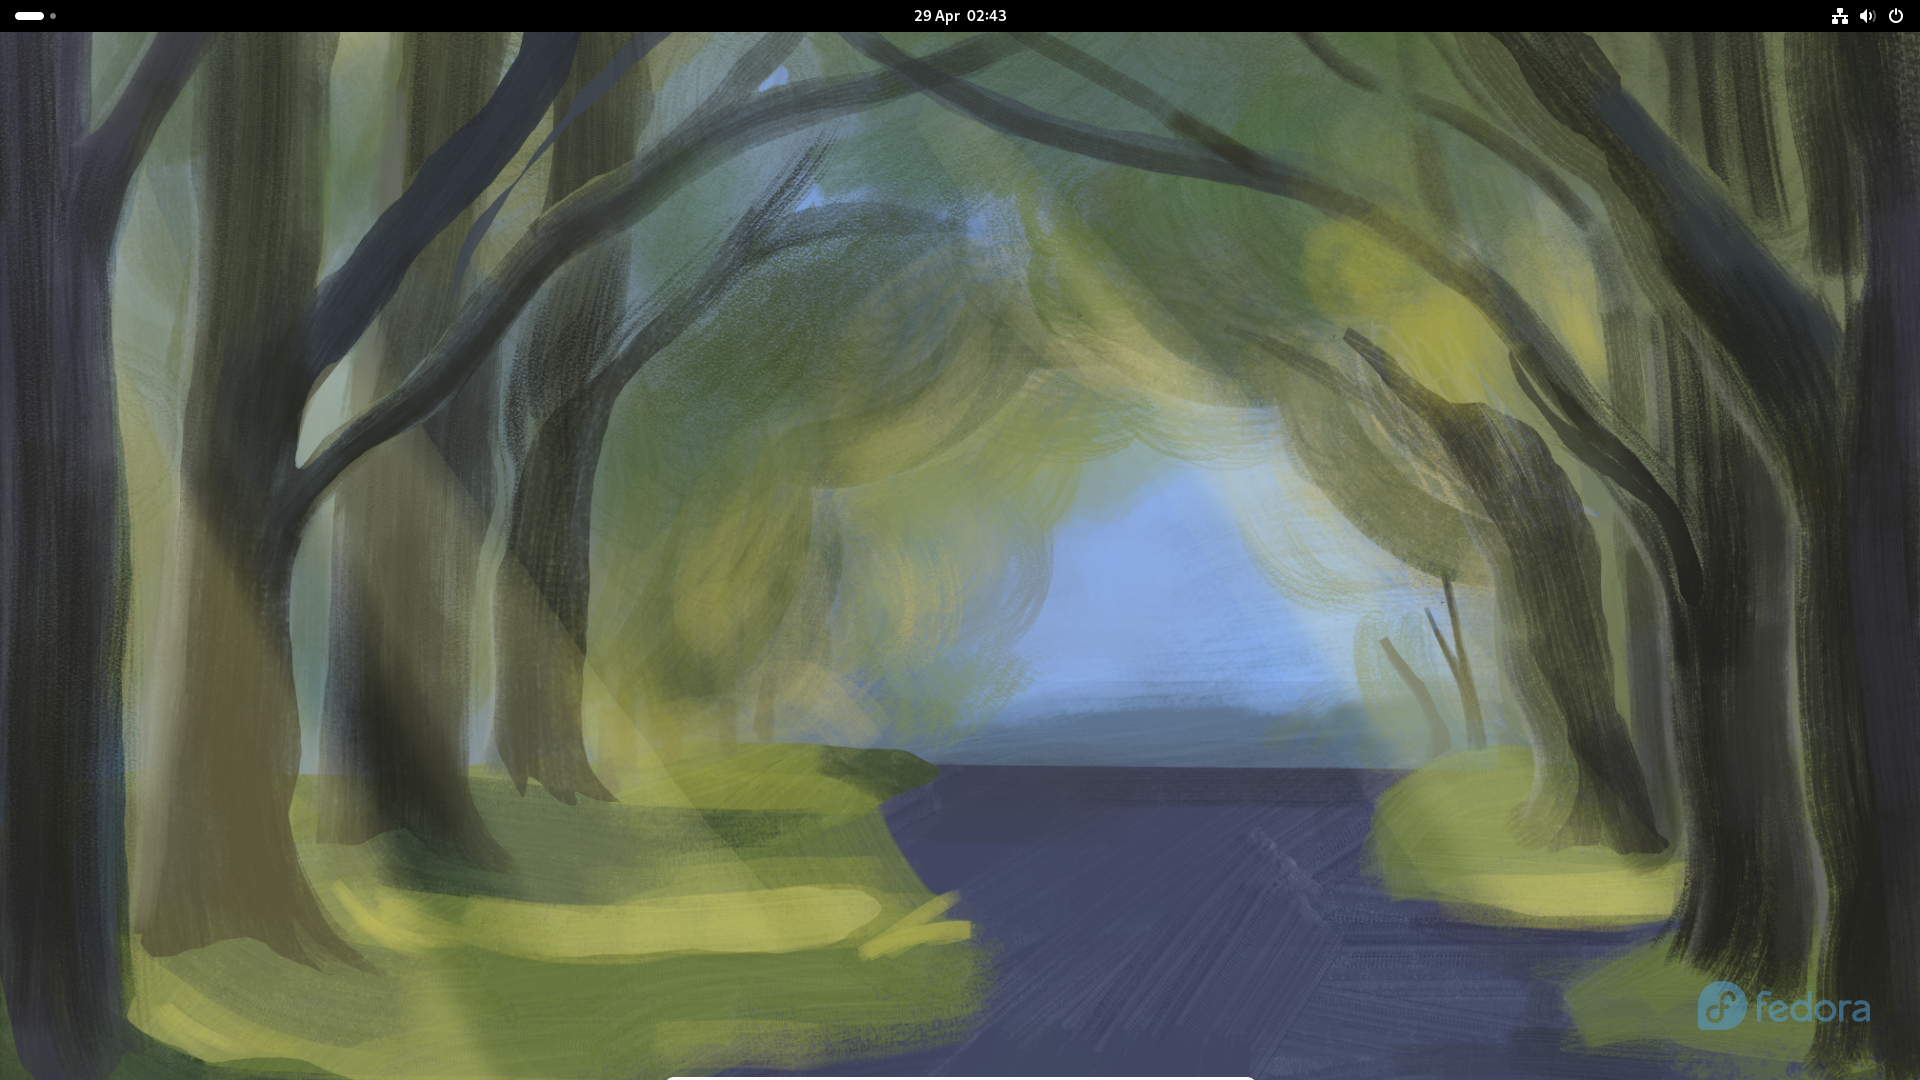 The Fedora 40 default GNOME desktop with a wallpaper showing a blurred forest scene